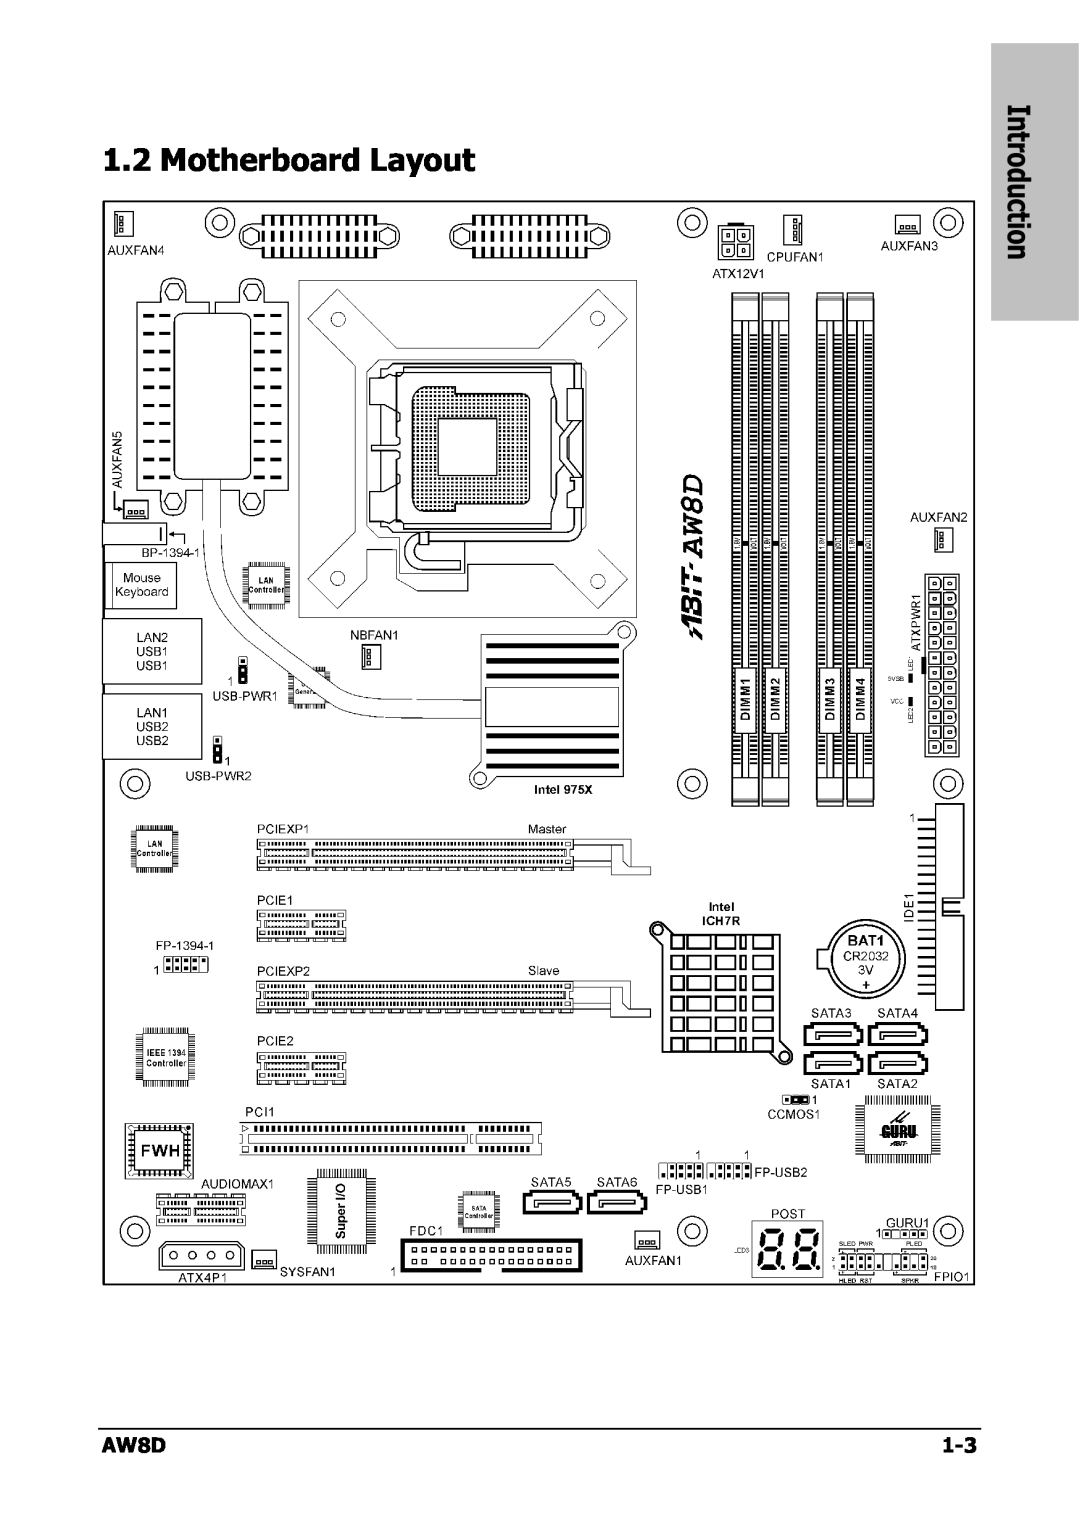 Intel AW8D user manual Motherboard Layout, Introduction 